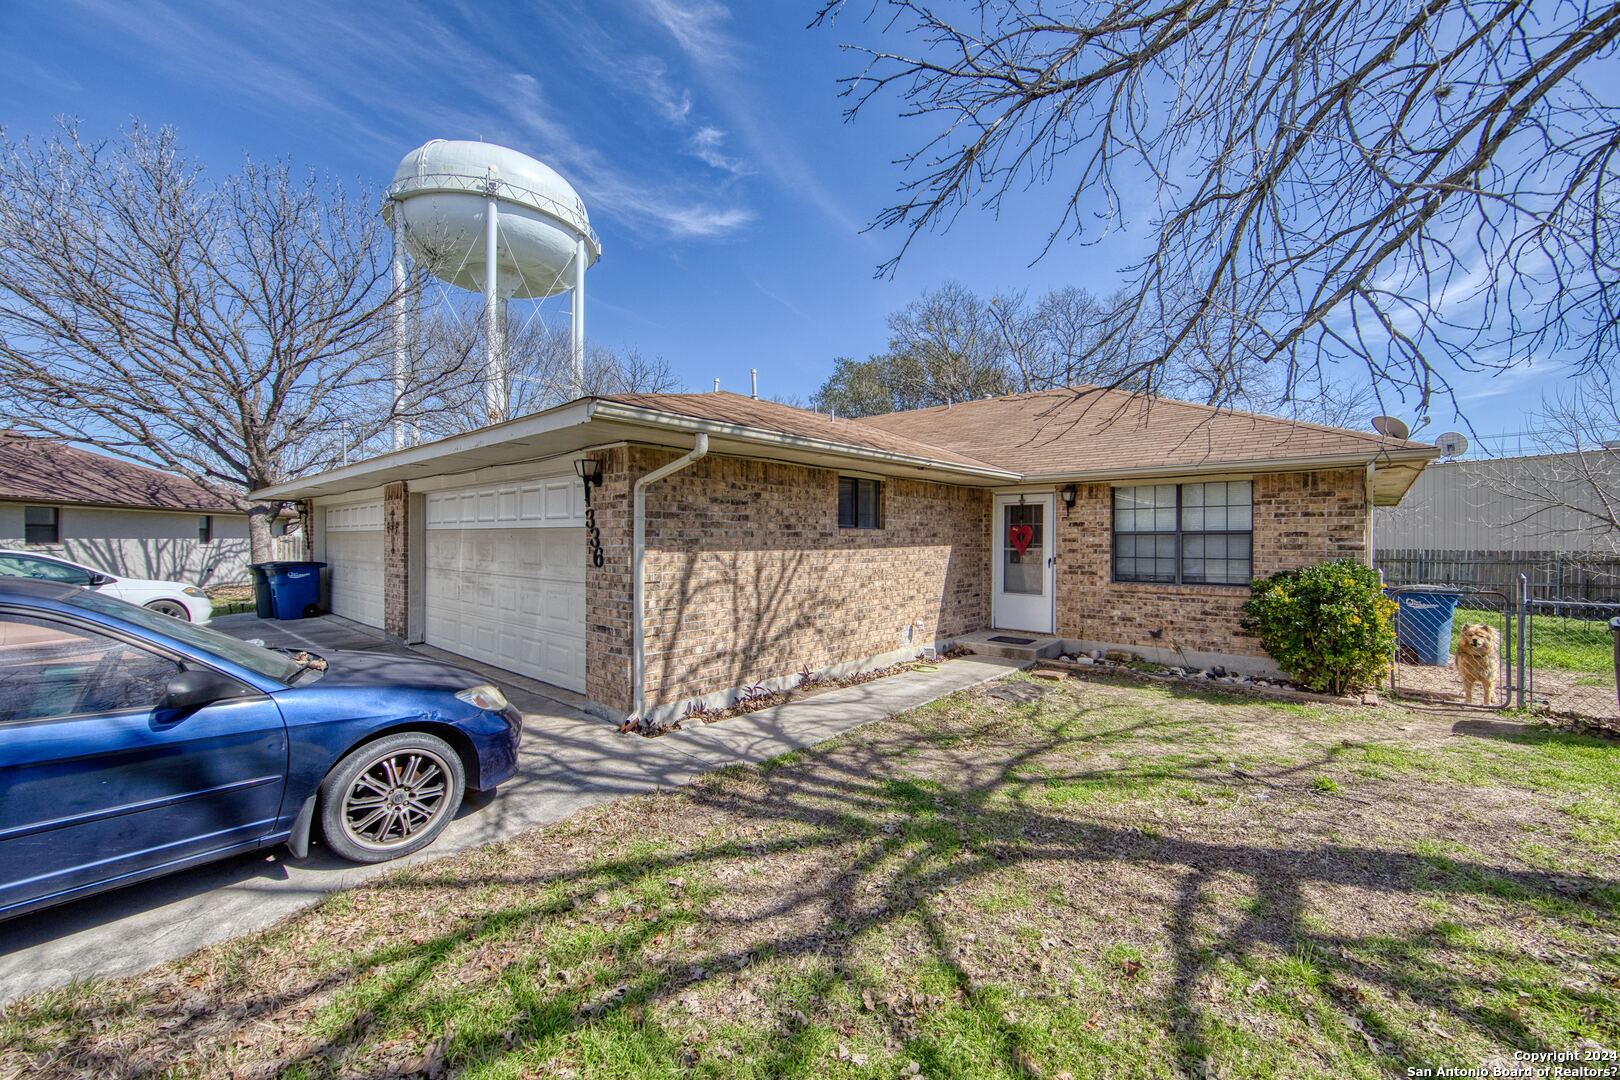 Photo of 1336 Summerwood Dr in New Braunfels, TX